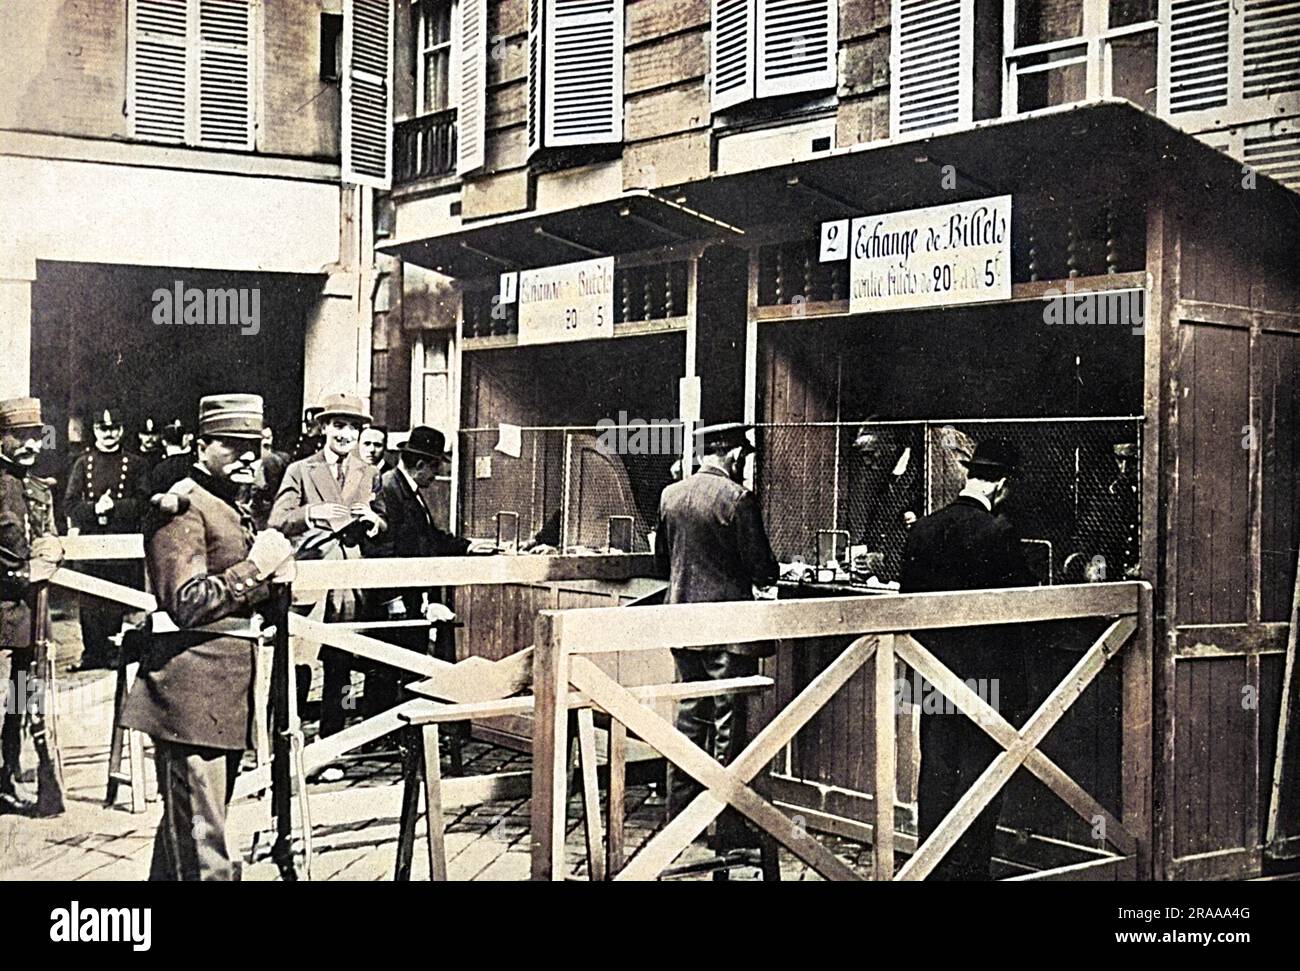 To safeguard the stock of gold at the outbreak of war, payments were limited to 50 francs a fortnight for each depositor. The photograph shows the temporary accommodation provided by the Paris banks to meet the abnormal business.     Date: 1914 Stock Photo